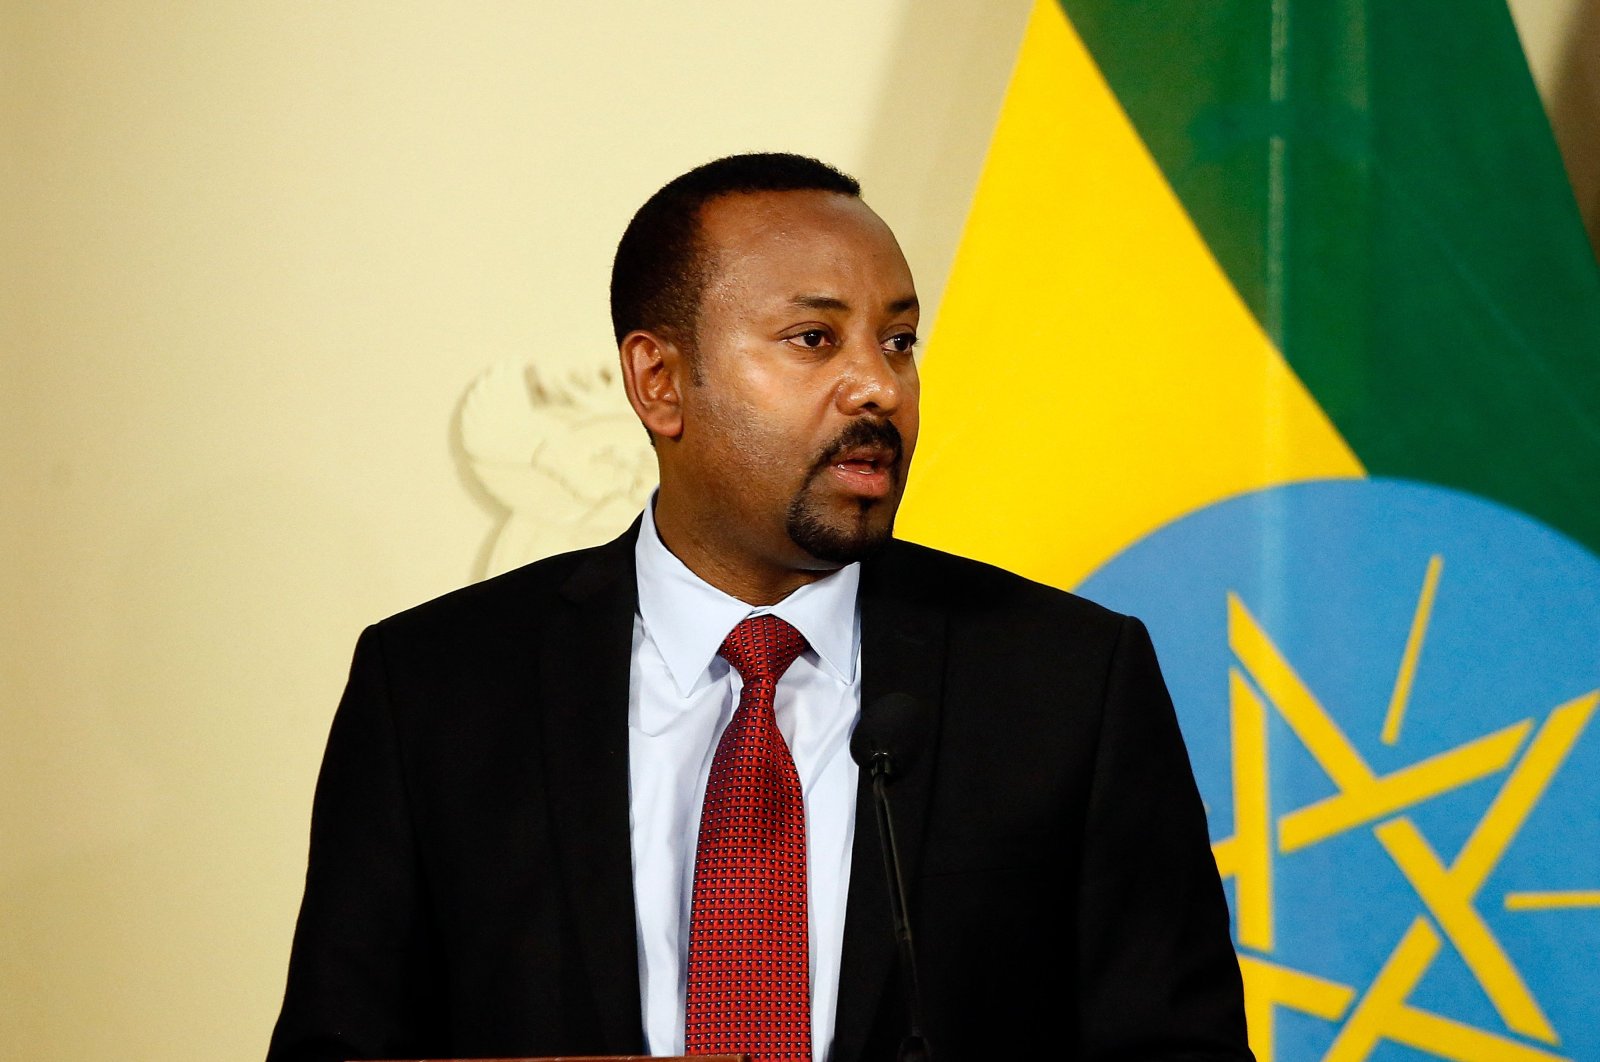 Ethiopian Prime Minister Abiy says Eritrea is withdrawing troops